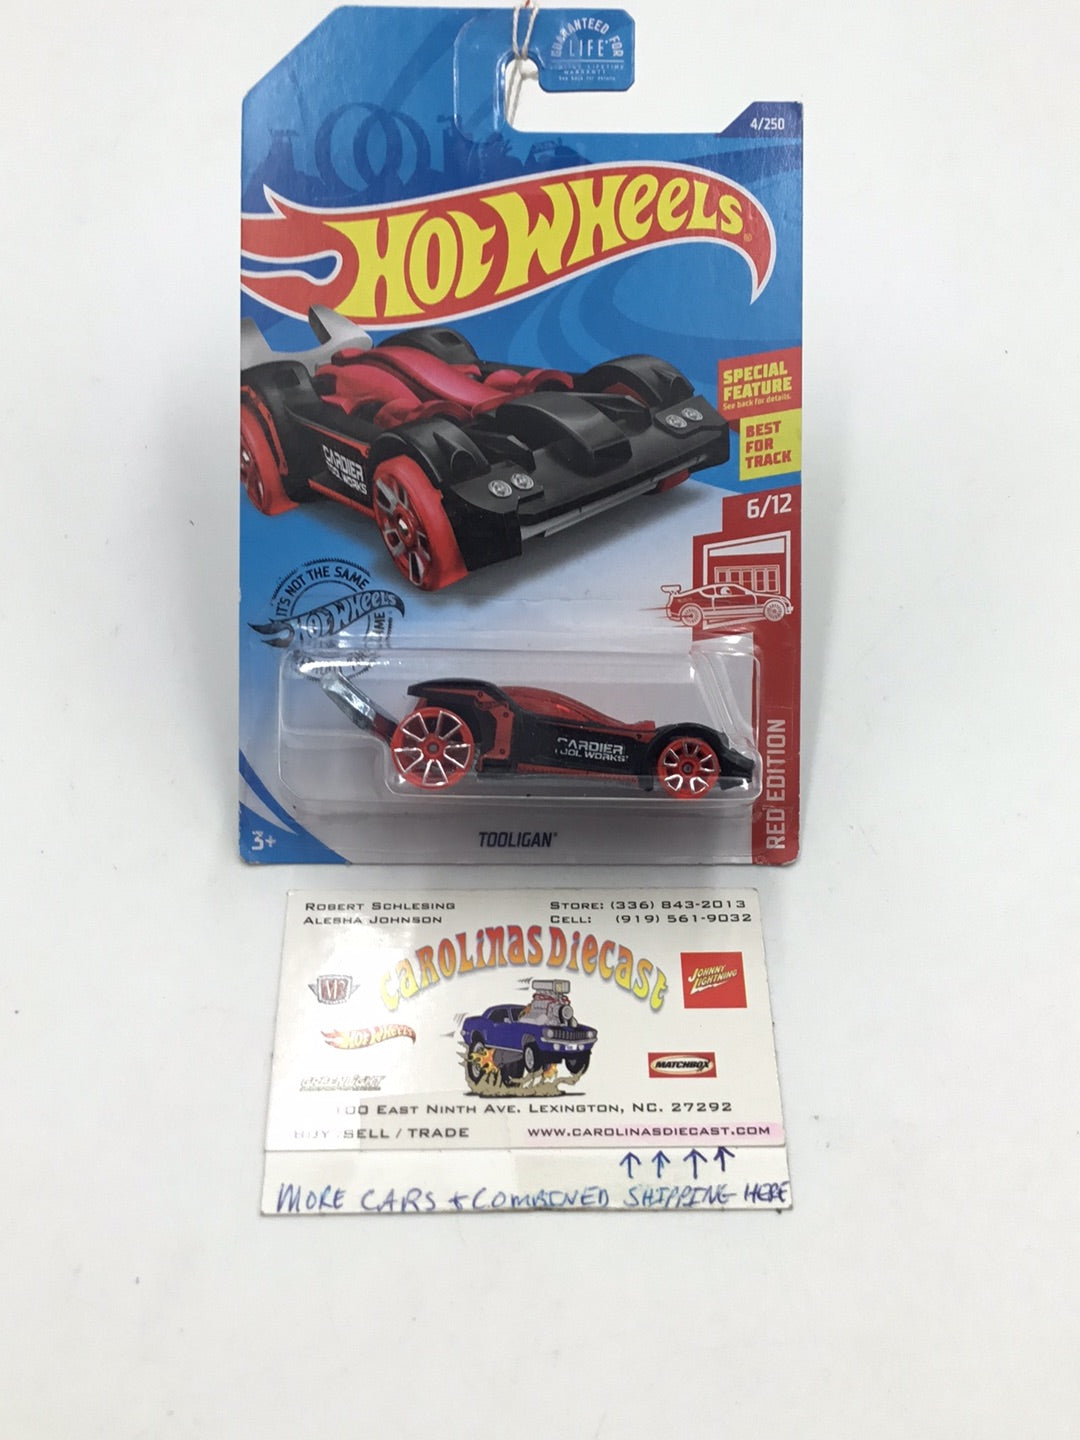 2020 hot wheels #4 red edition Tooligan target red #6 AA2